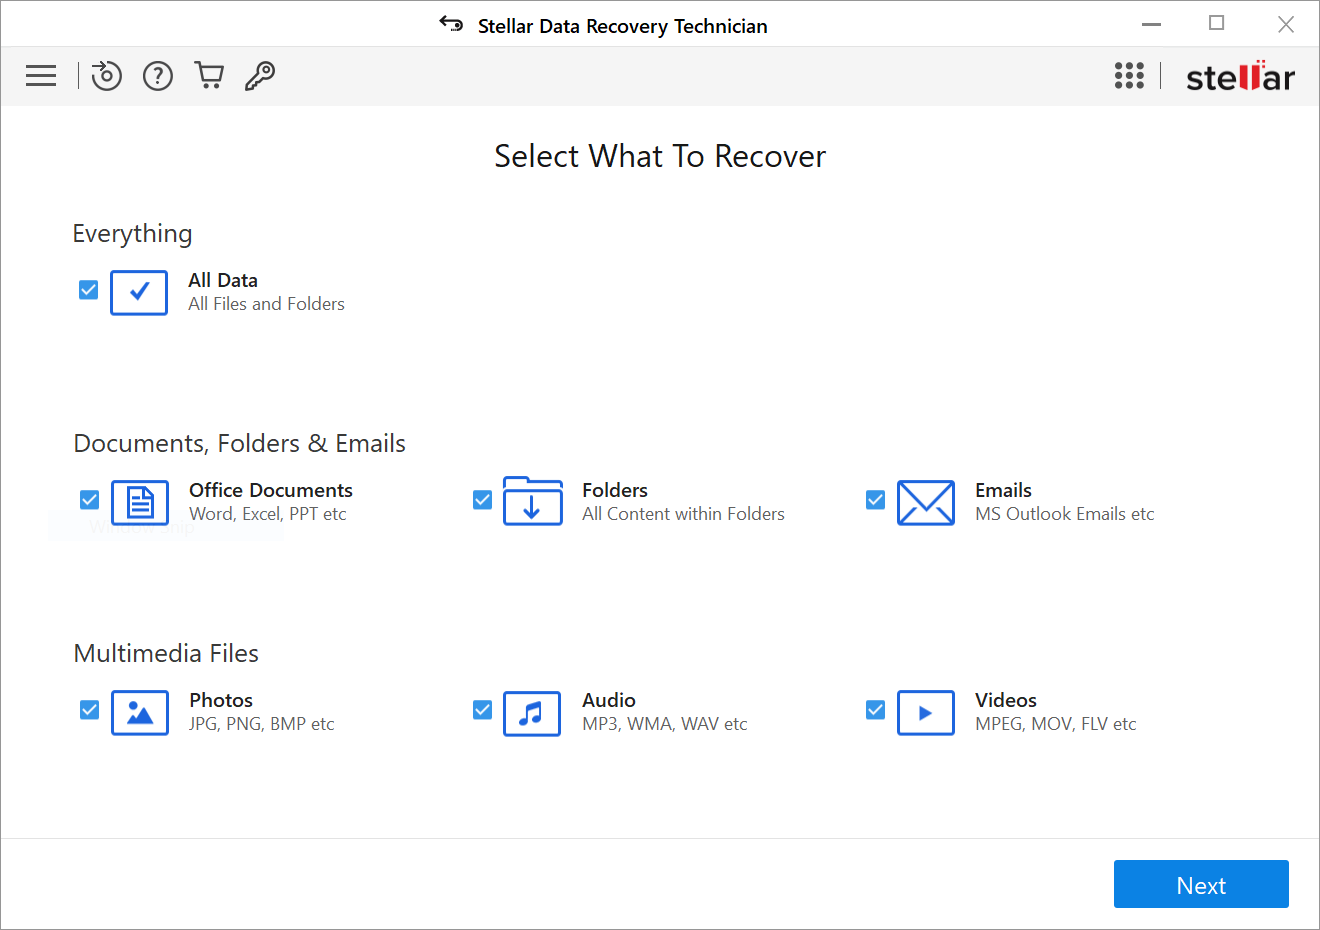 Screenshot of RAID data recovery technician software interface showing options to select file types for recovery, including documents, folders, emails, photos, and multimedia files.